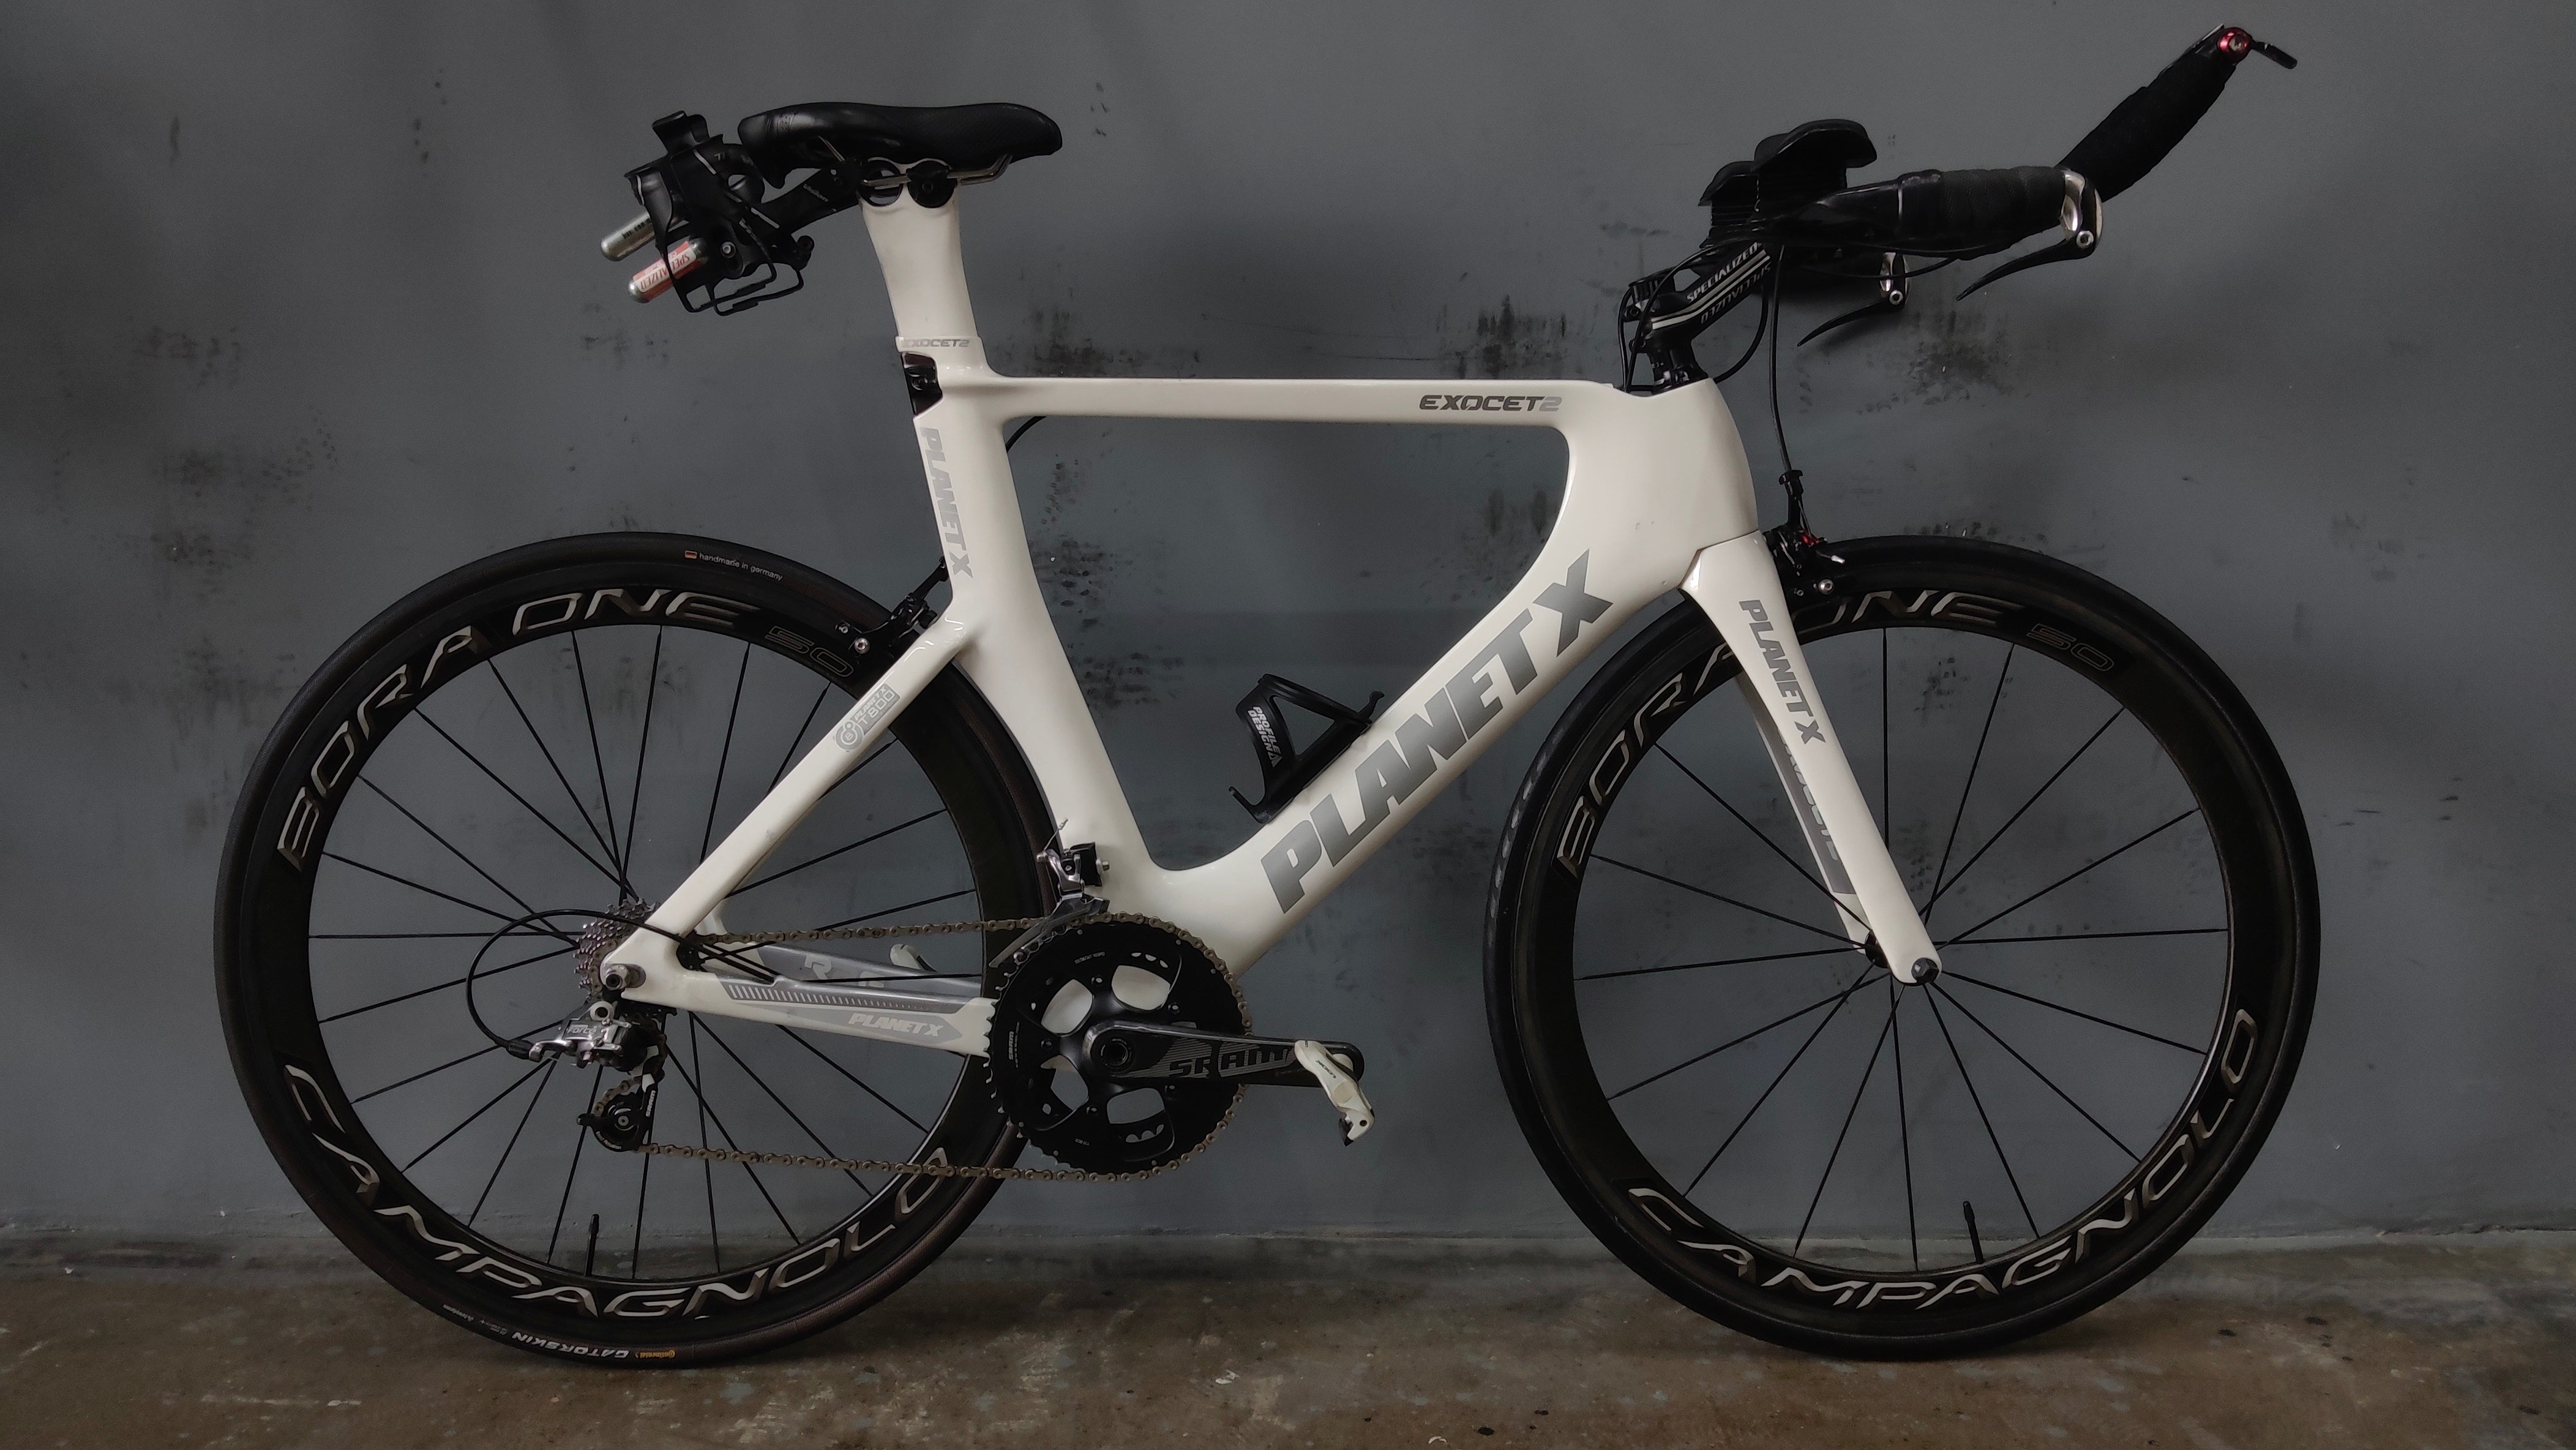 Planet X Exocet 2 Time Trial Bike